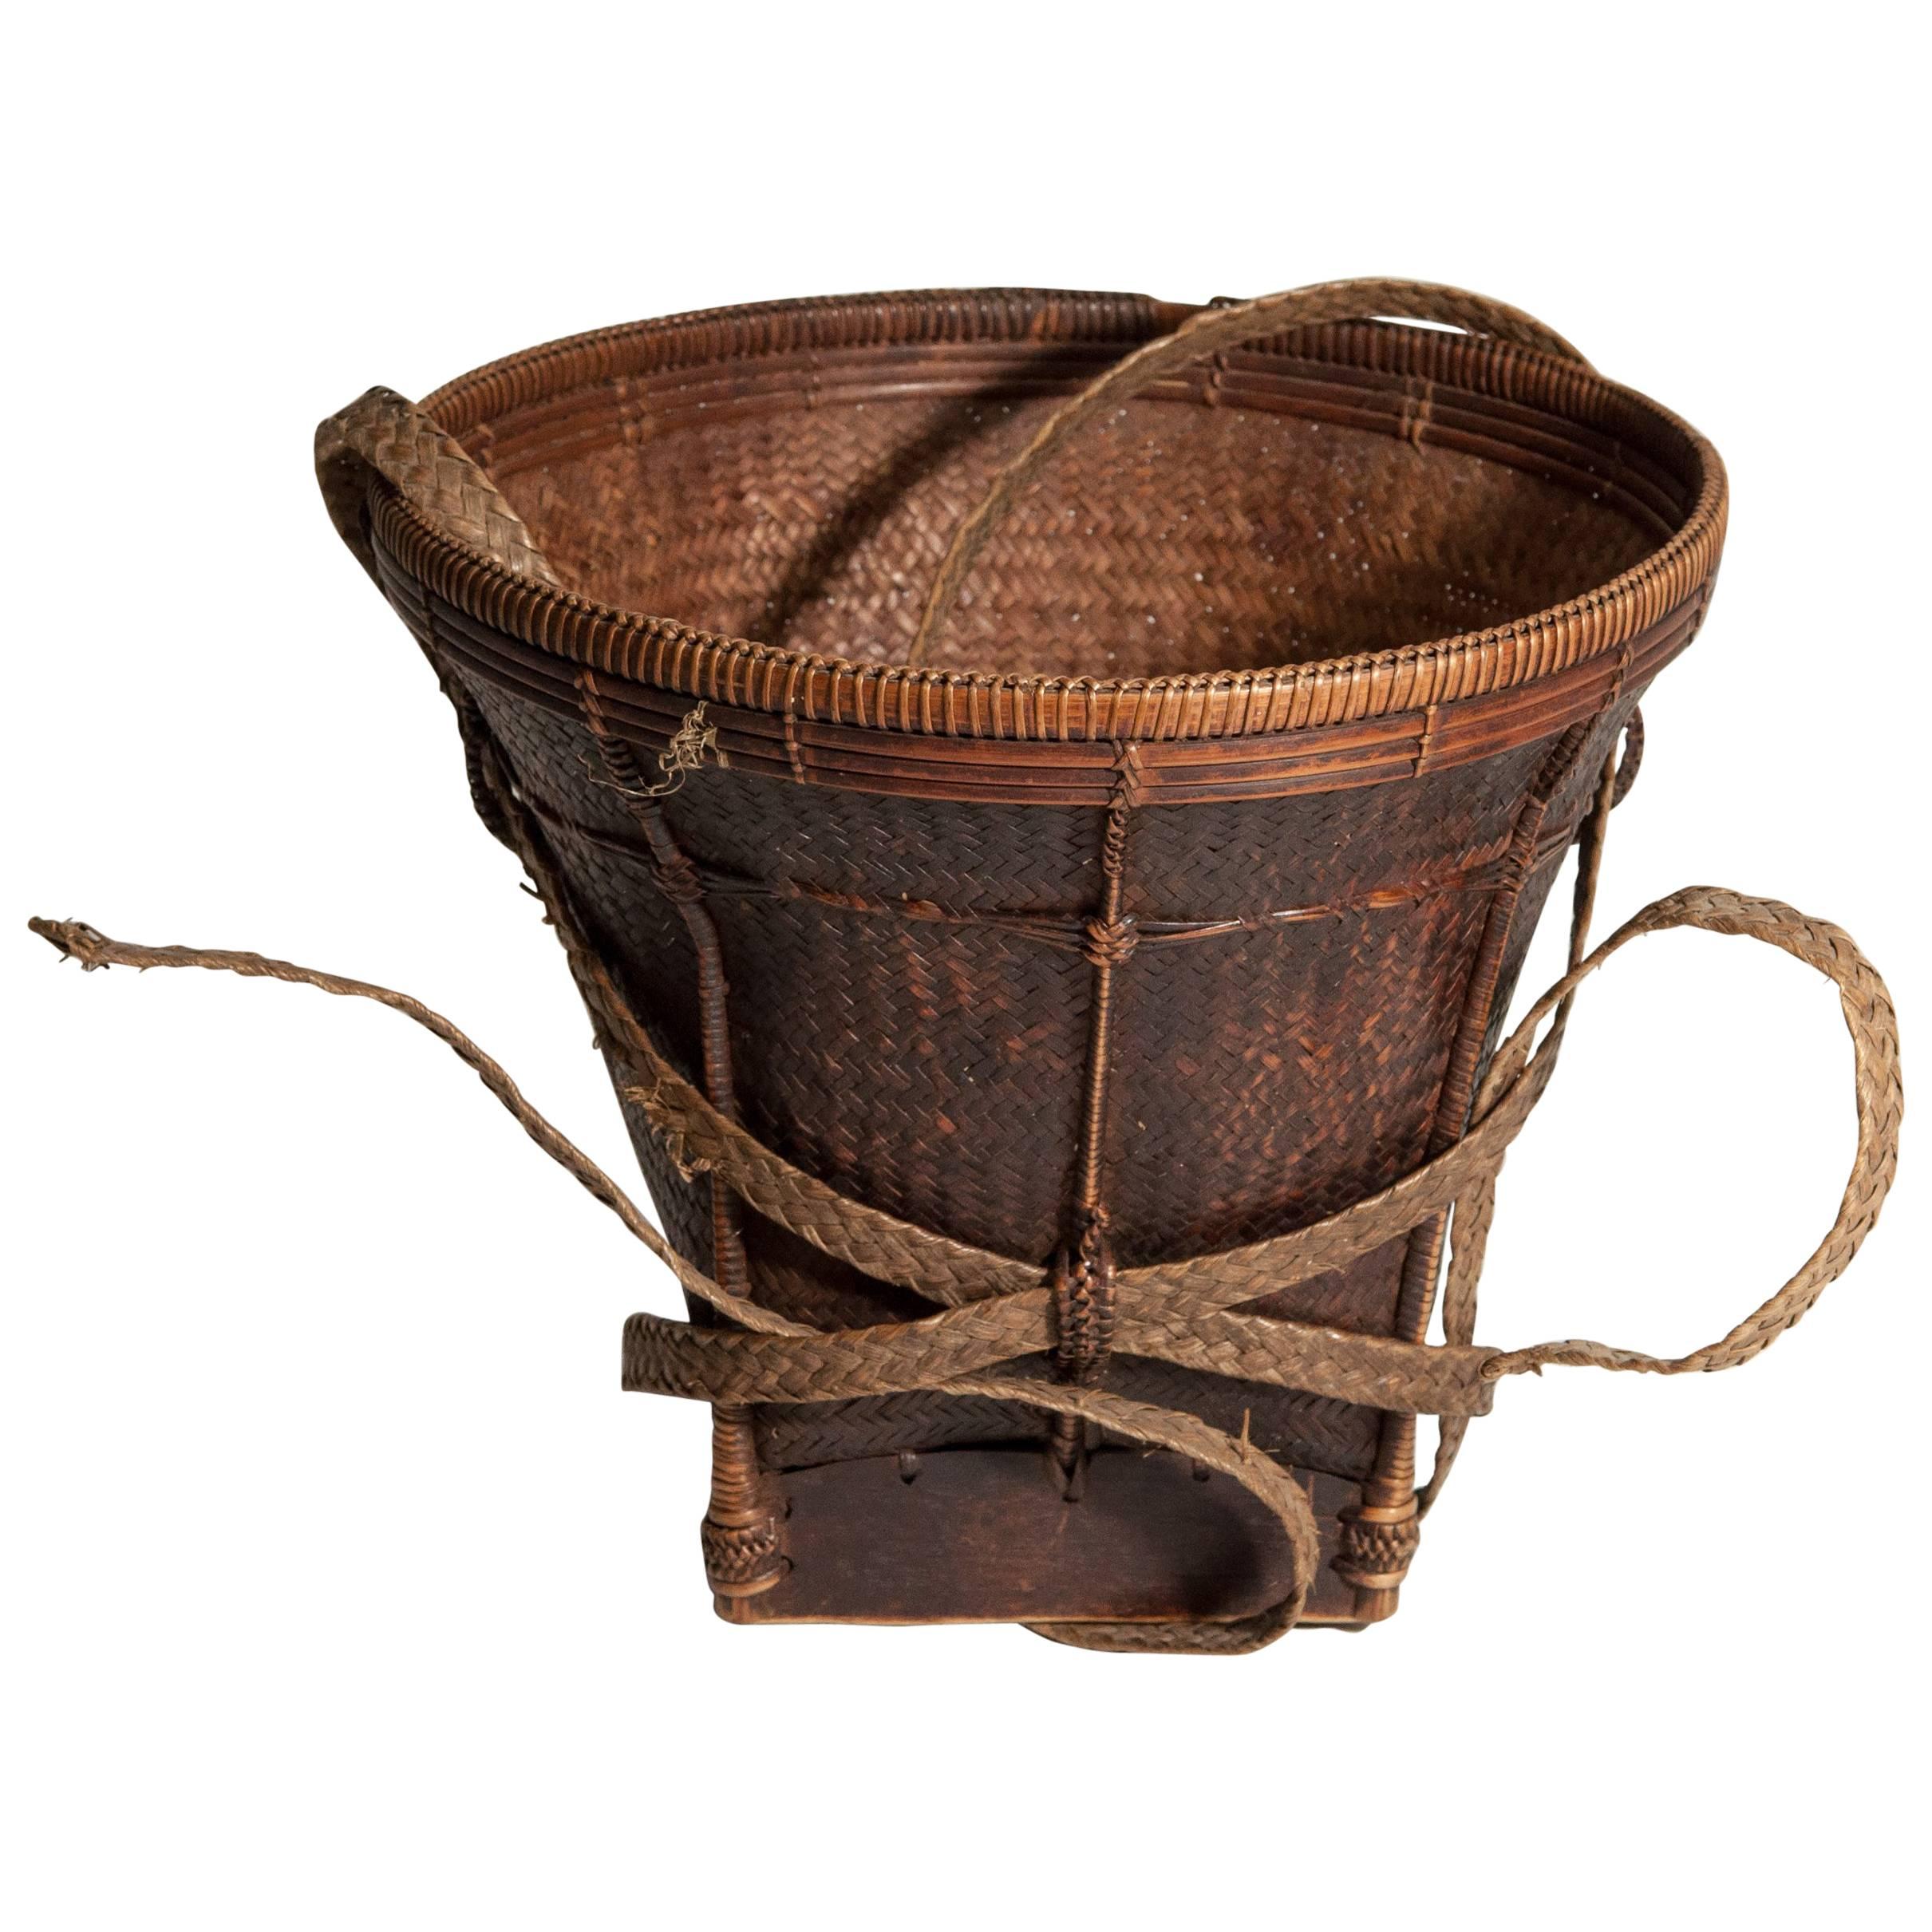 Tribal Collecting Basket from the Ata Pue Area of Laos, Mid-20th Century, Bamboo